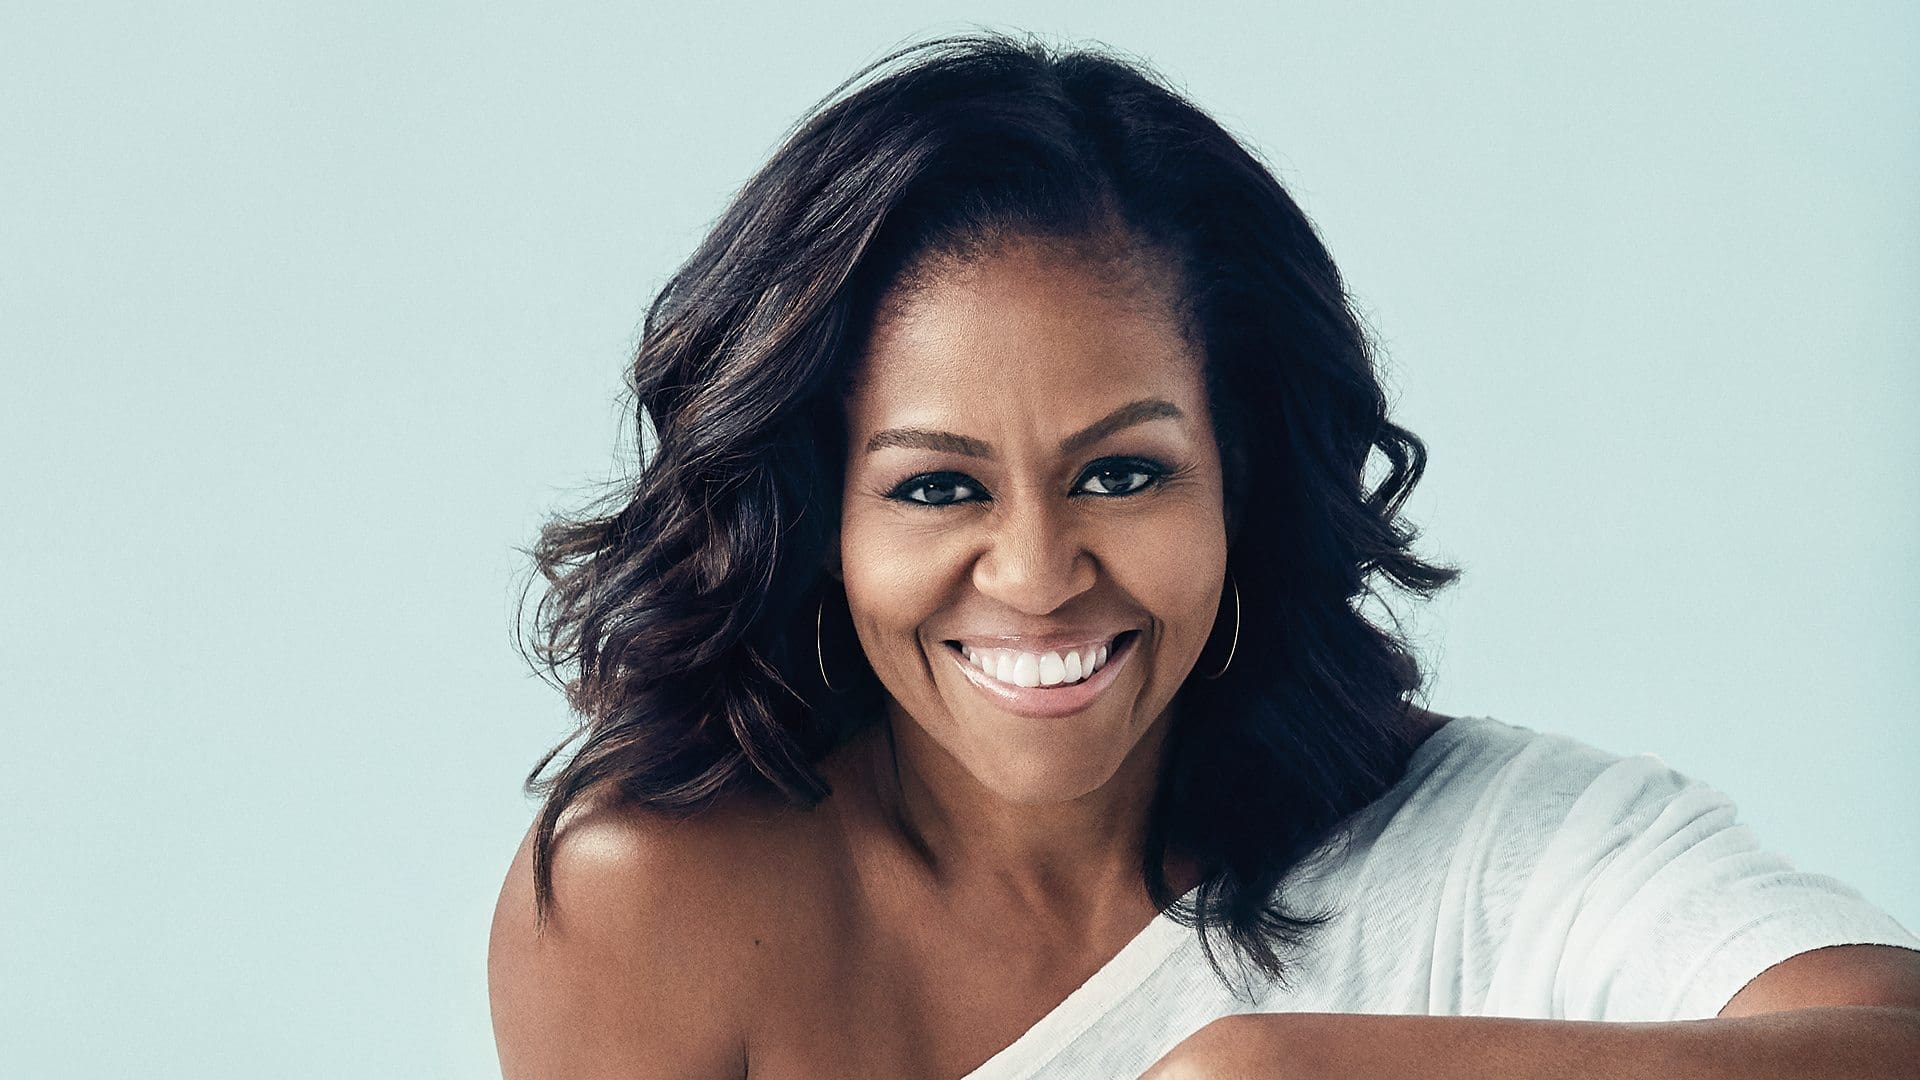 Michelle Obama's Fans Cry For Her Help After She Opens Up About Dealing With Depression